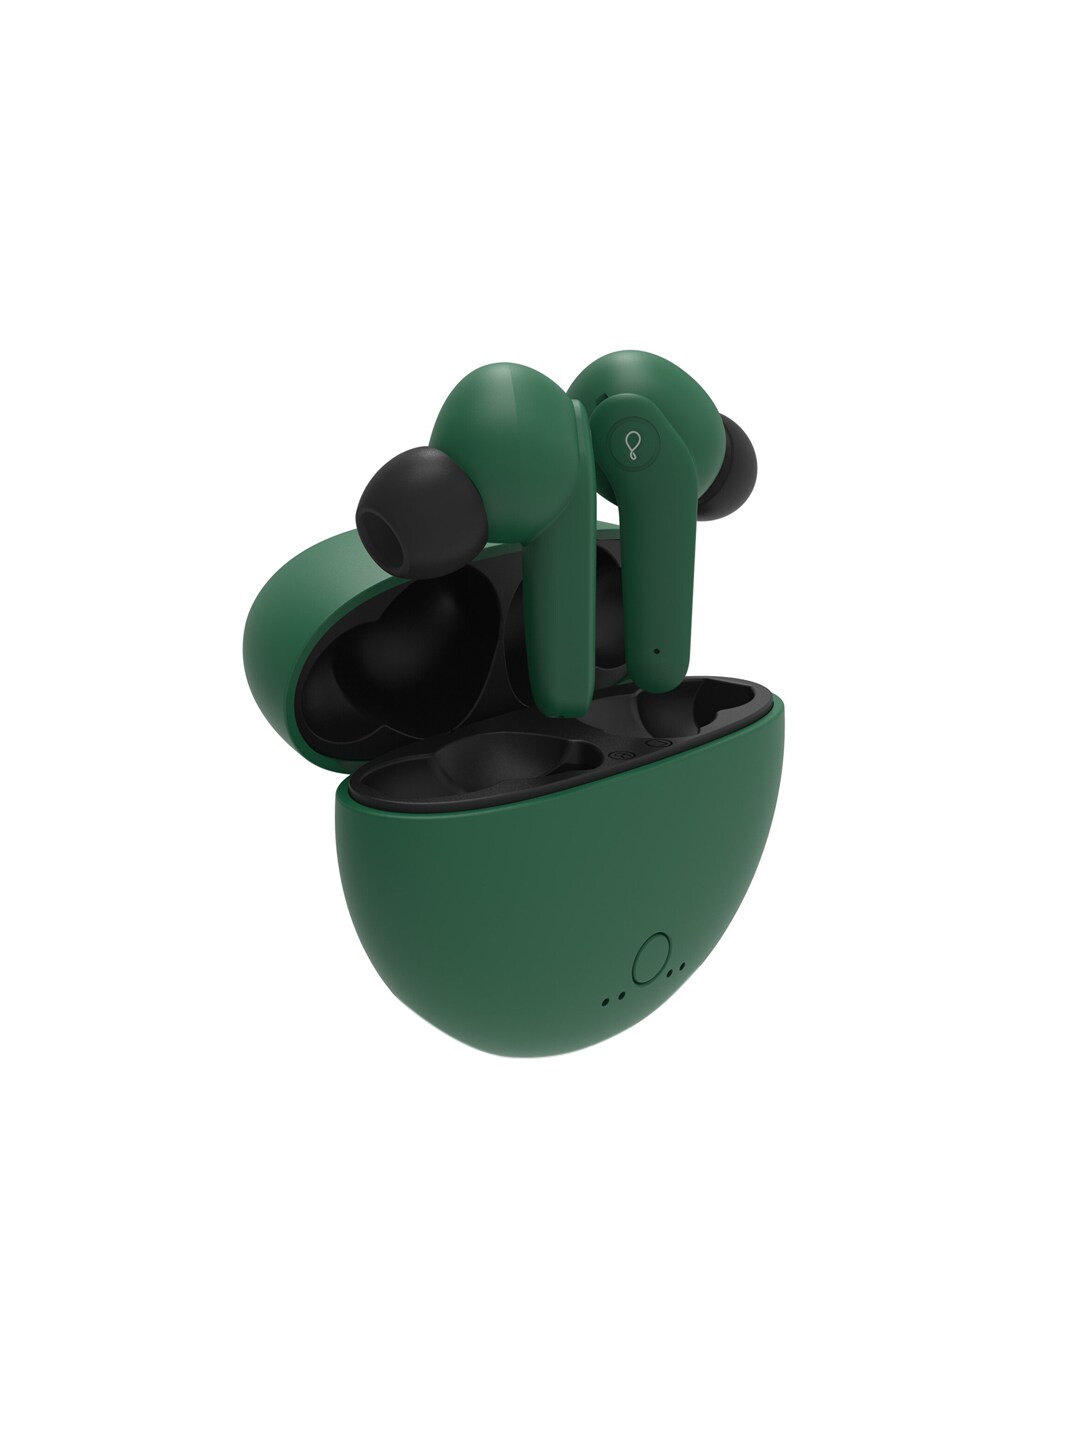 pebble Green & Black Immersive Audio - Up to 15H Playback - Pebble Arc TWS Earbuds Price in India